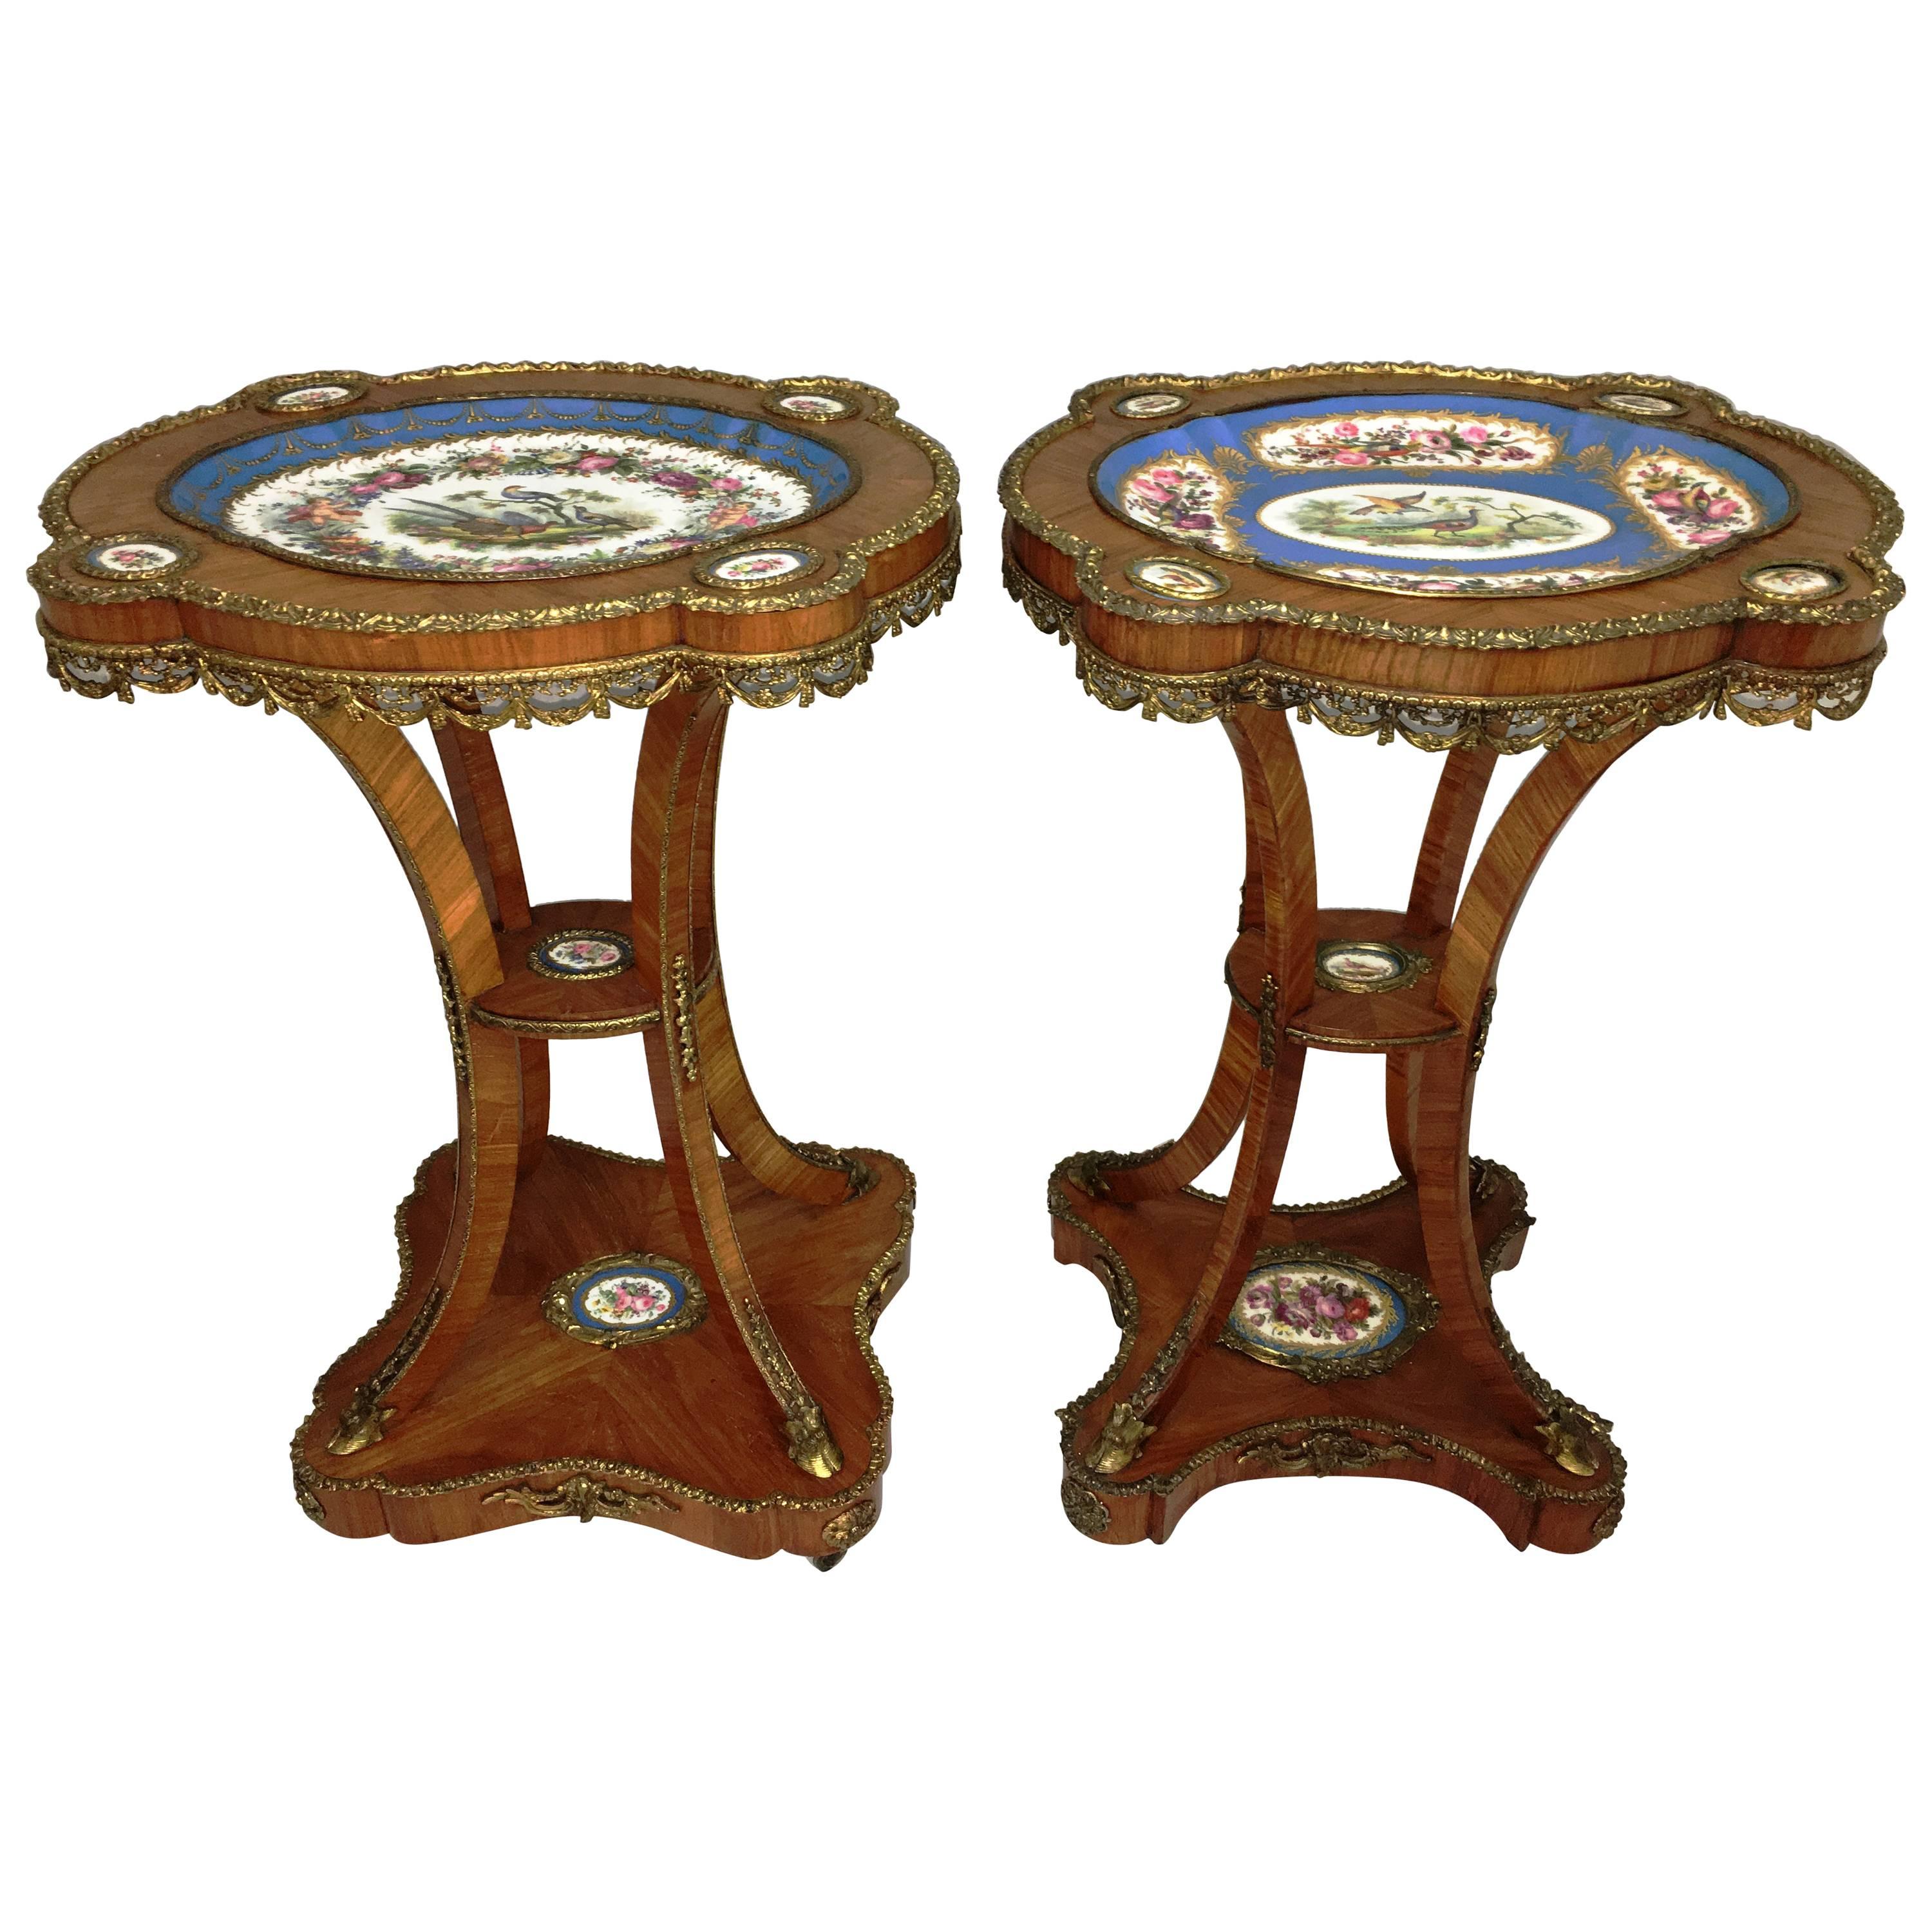 Pair 19th Century French Sèvres style Porcelain Tables